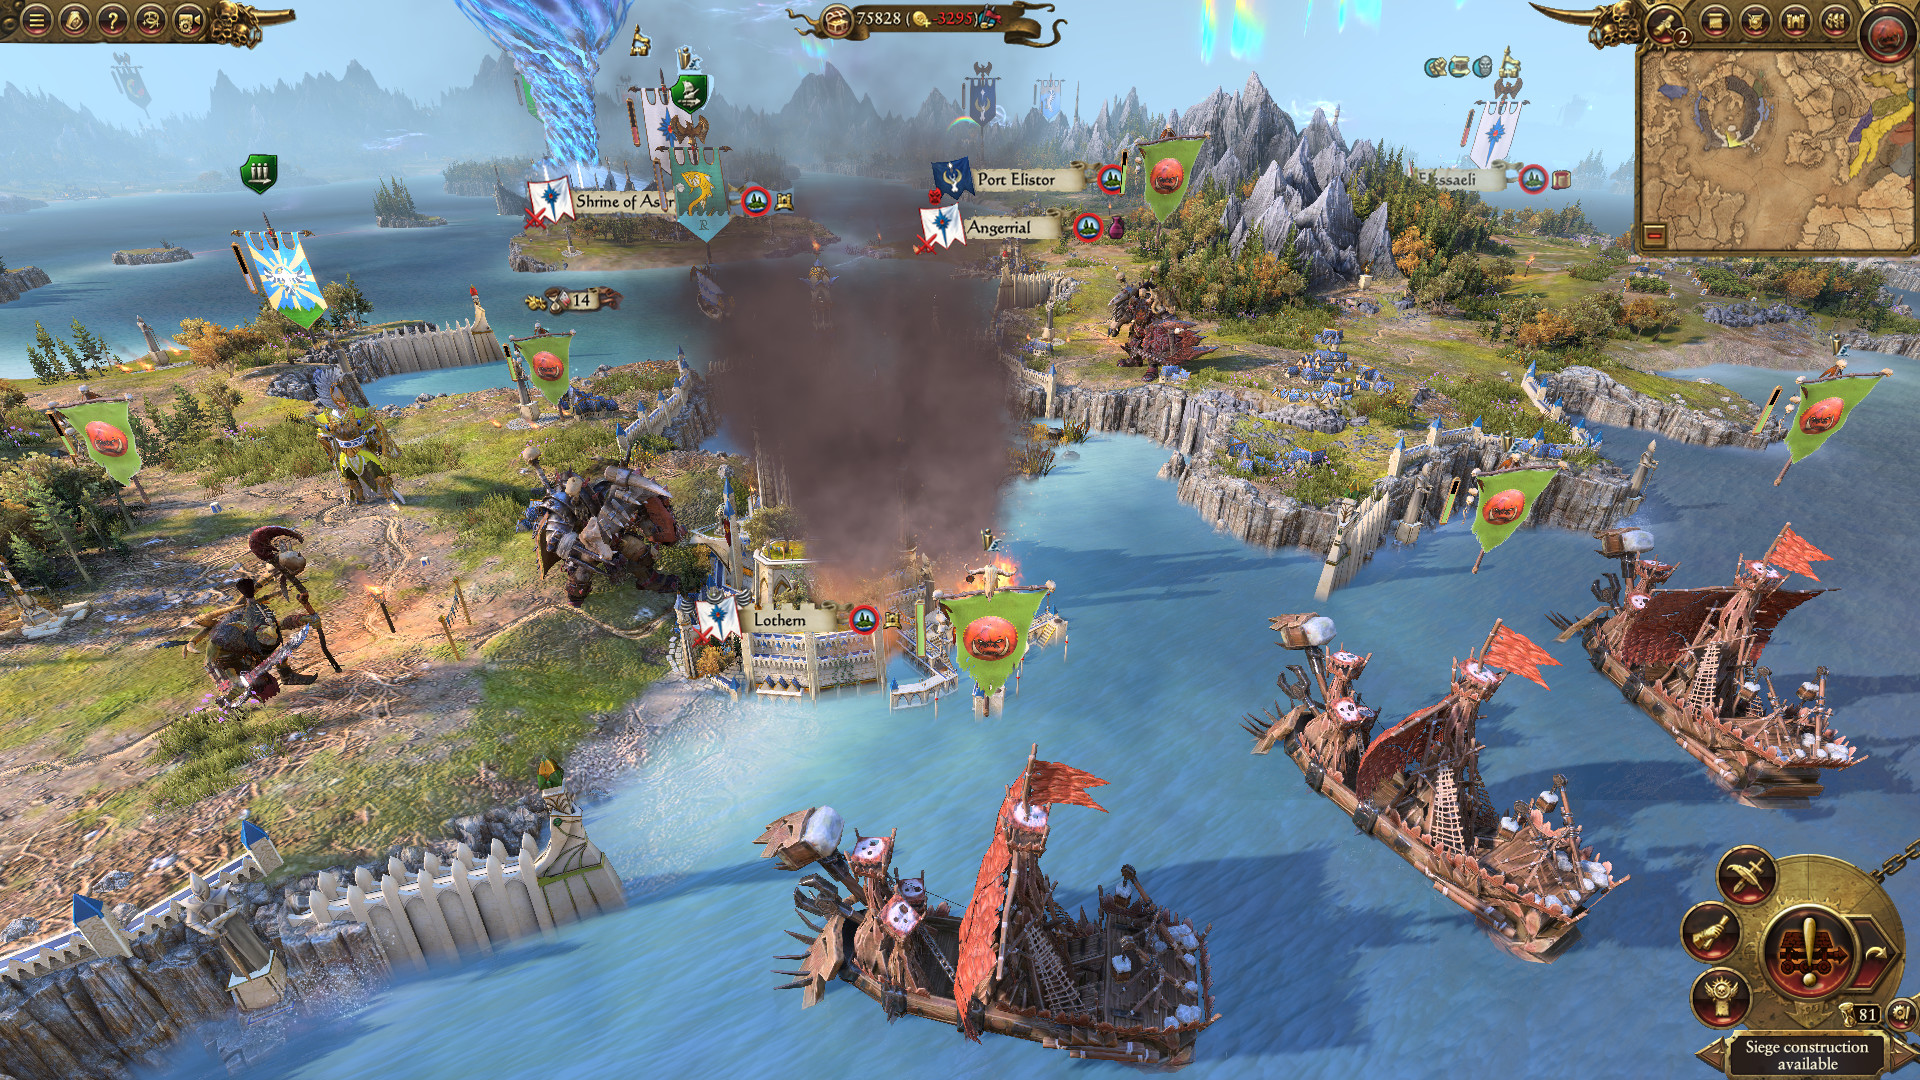 A shot of the Warhammer campaign map from the Immortal Empires Warhammer 3 DLC